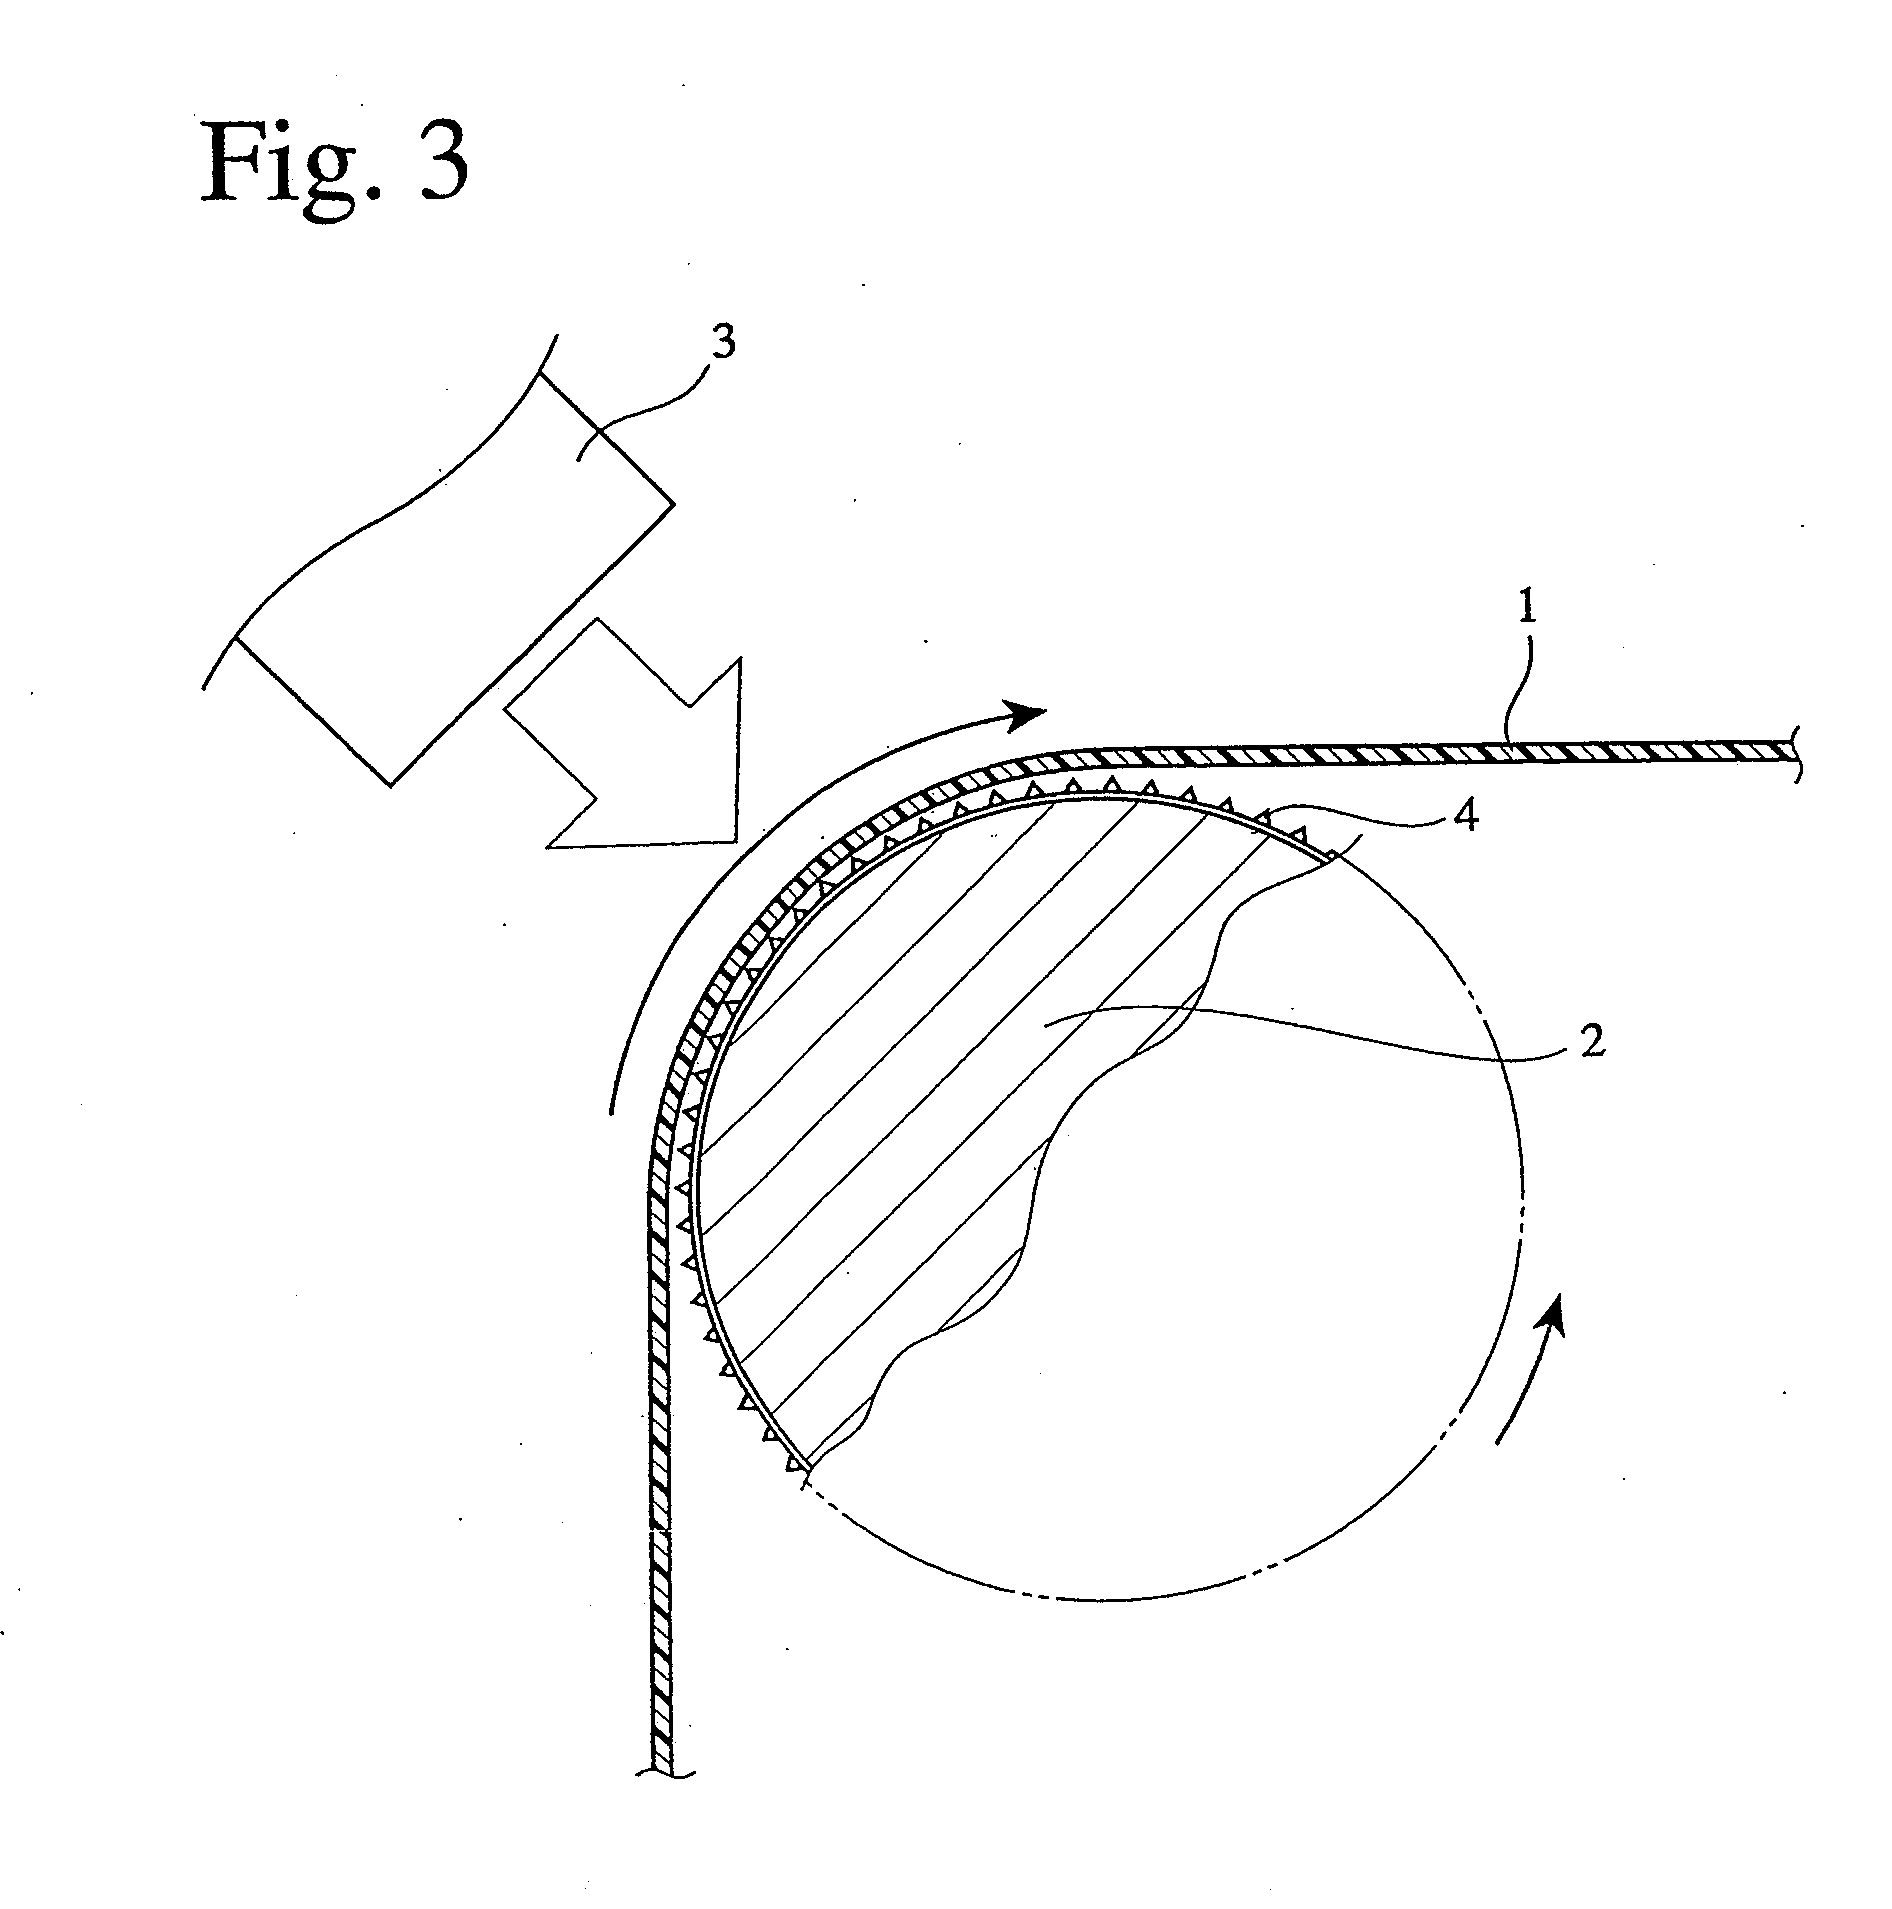 Easy-to-straight-tearing thermoplastic resin film and its production method and apparatus